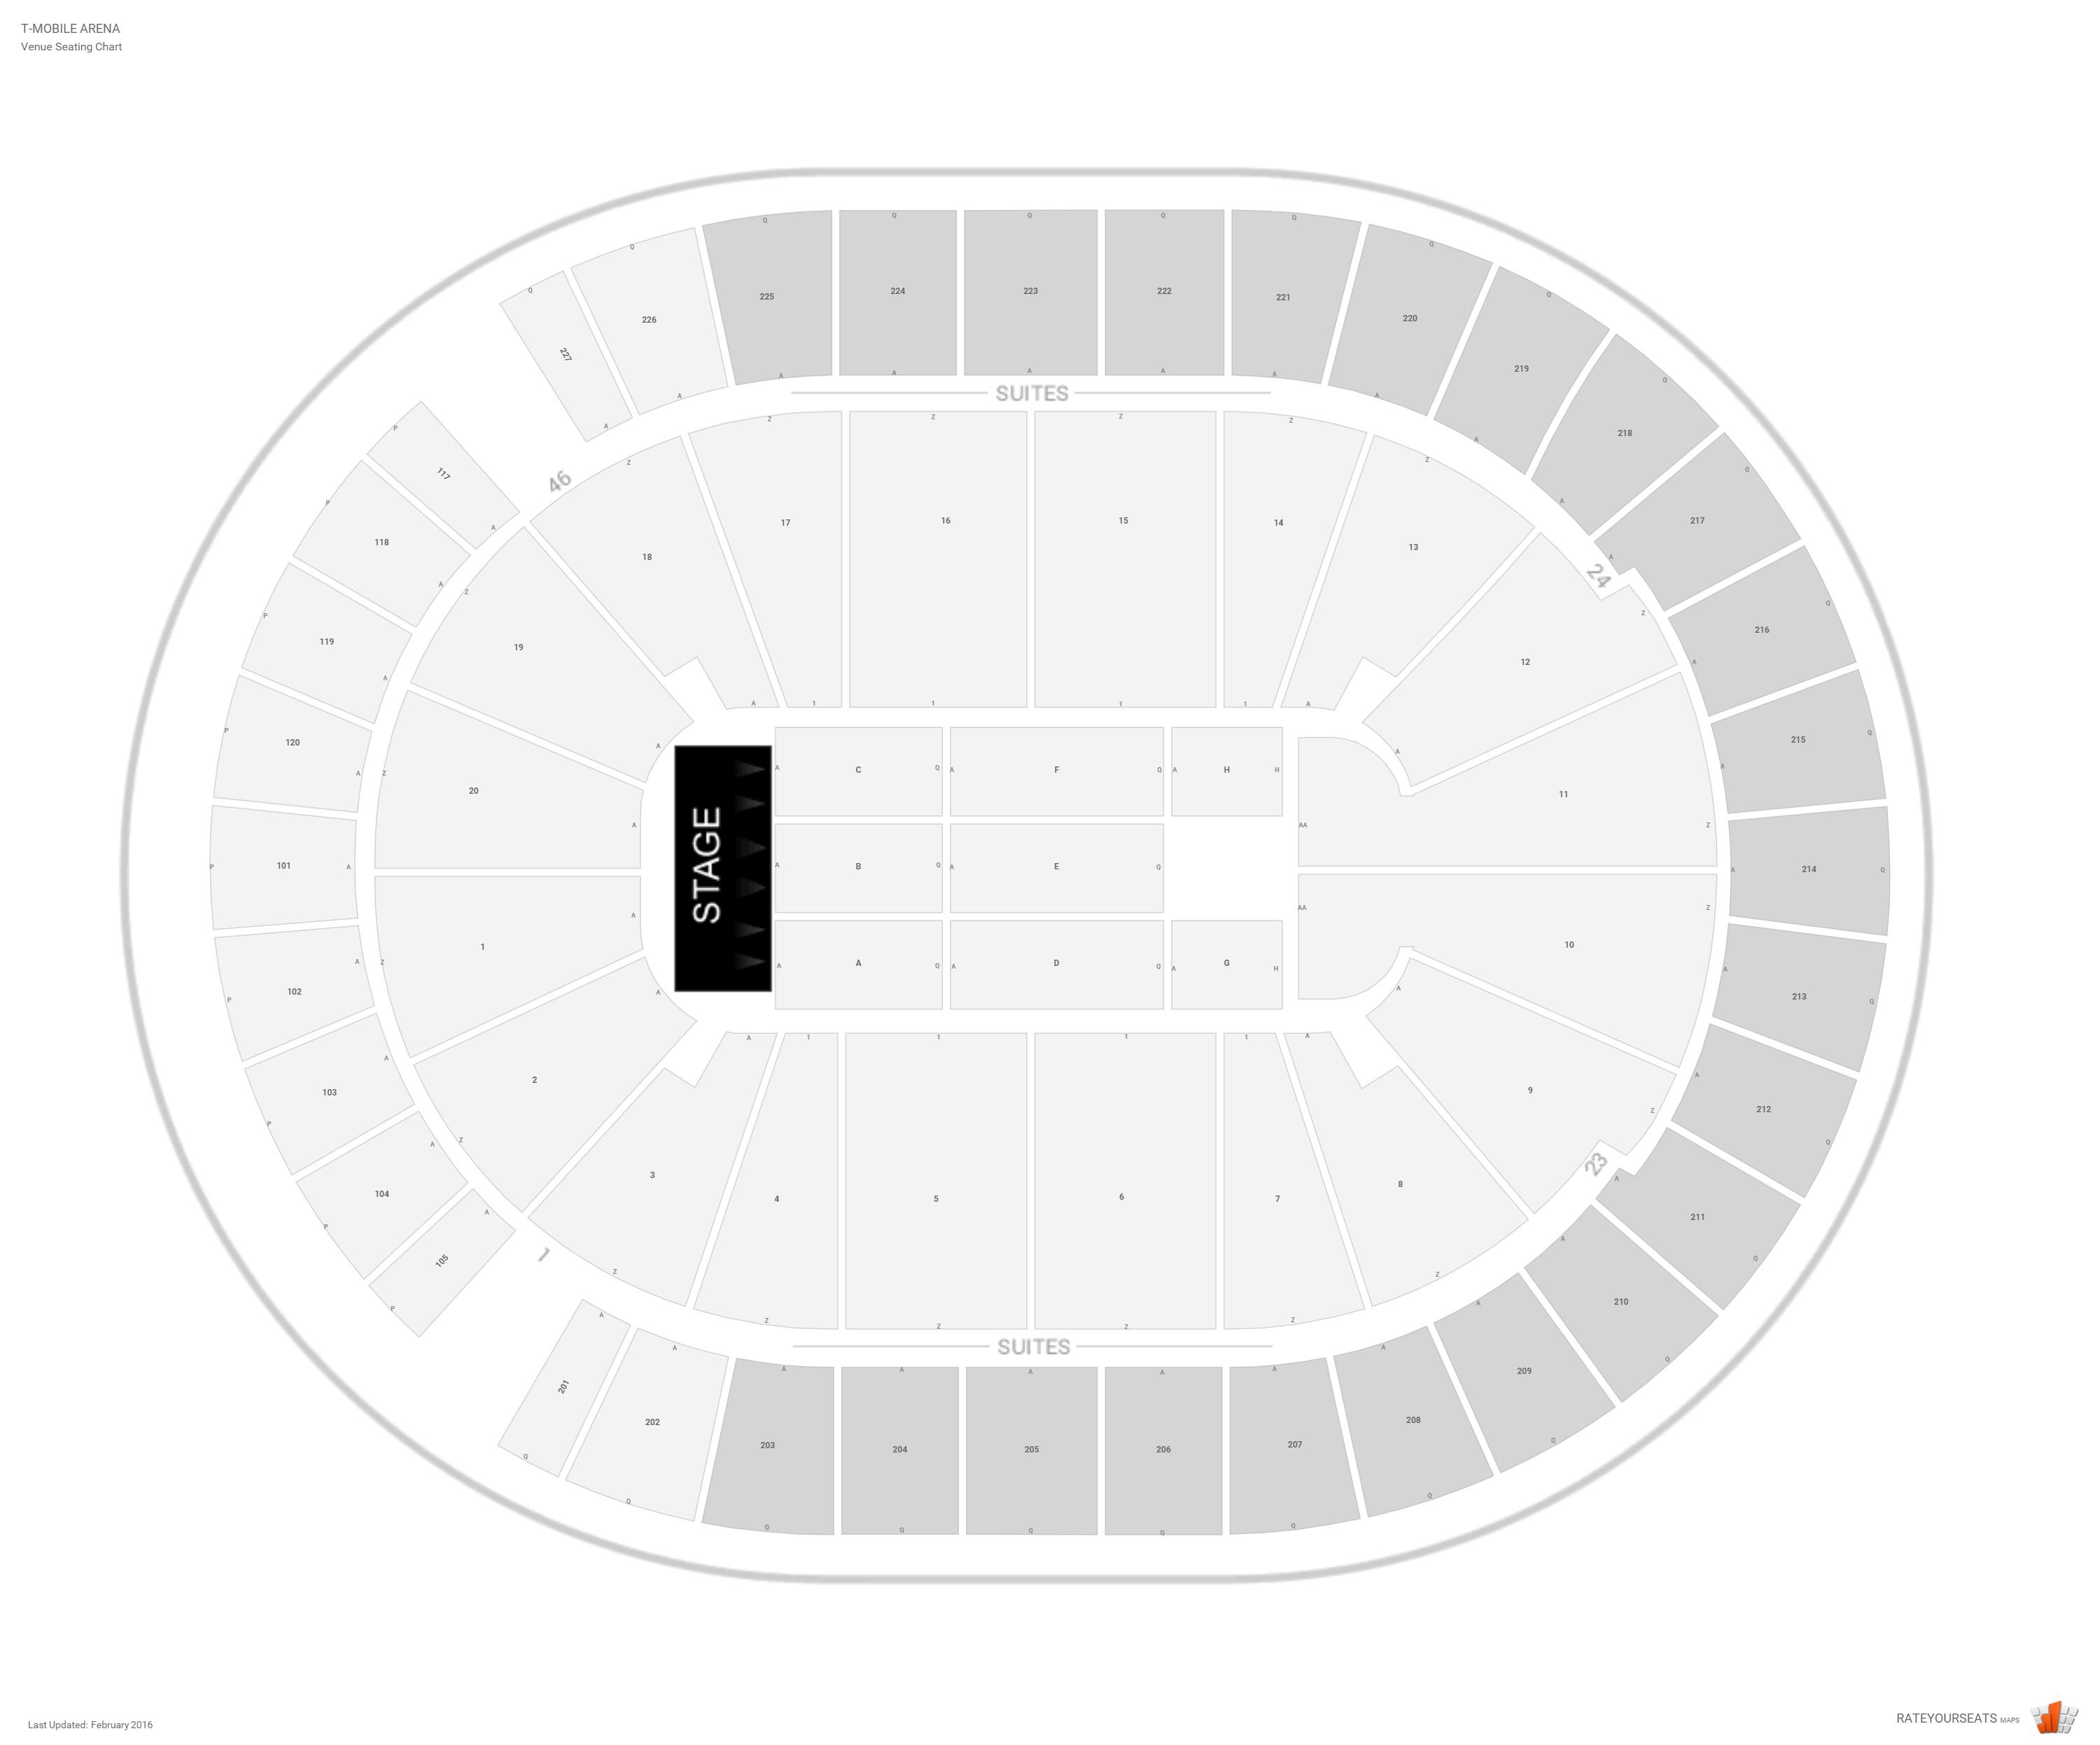 T-Mobile Arena Concert Seating Guide - RateYourSeats.com